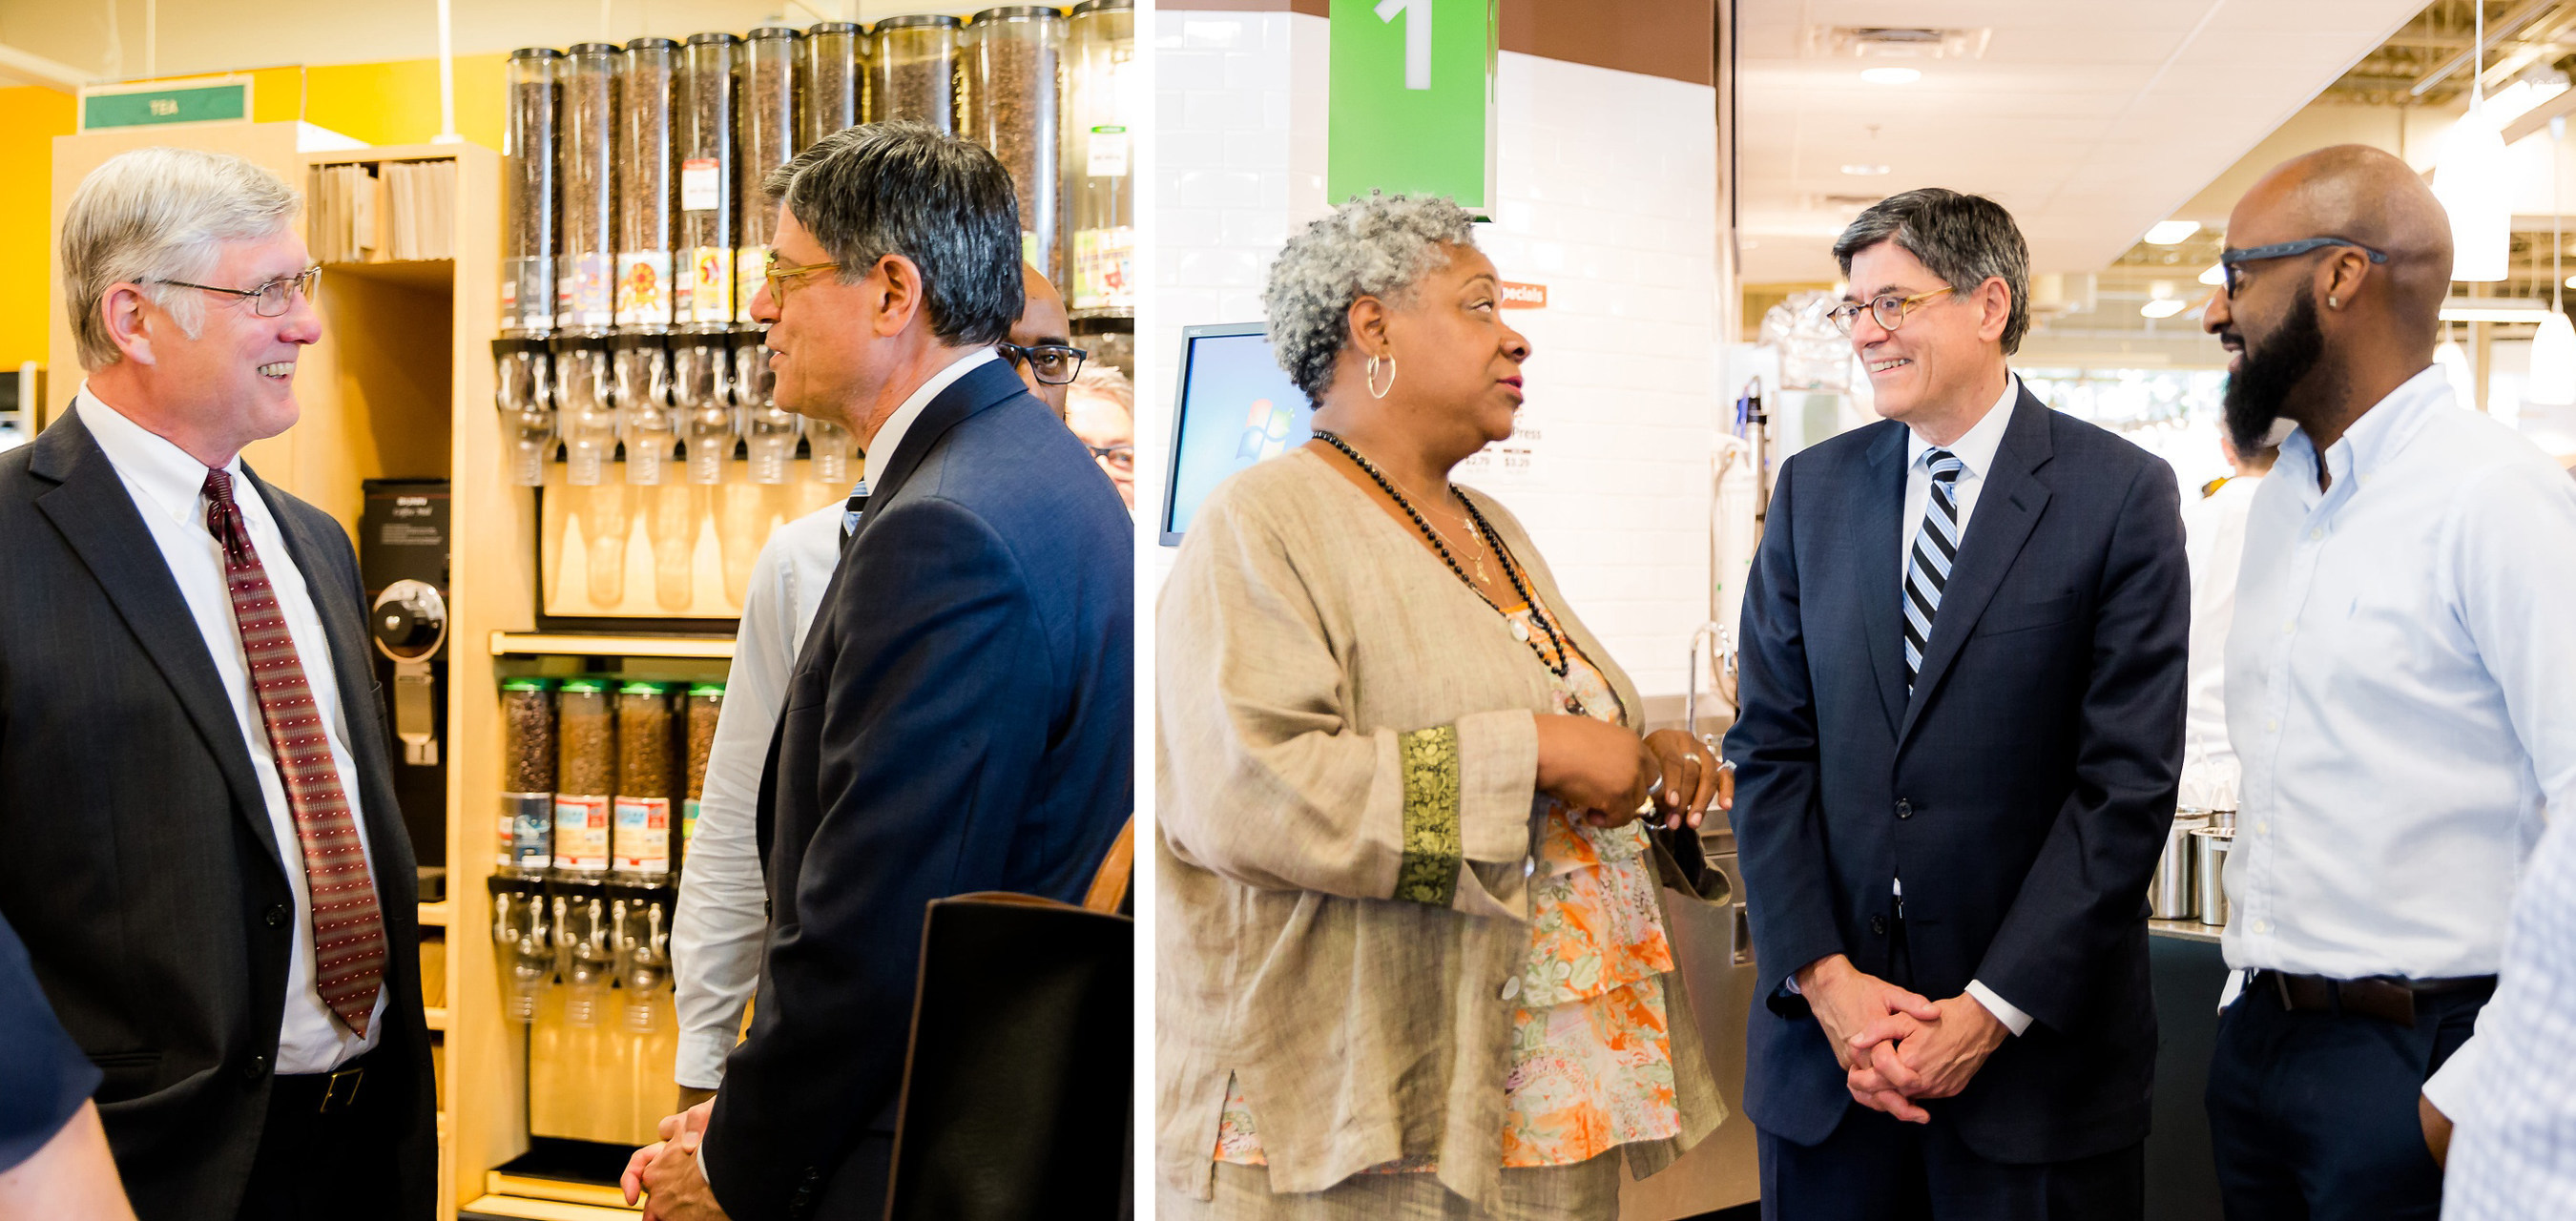 Left: MMCDC President Kevin Shipley and Treasury Secretary Jack Lew at Seward Community Cooperative Friendship Store. Right: Front End Manager Vivian Mims, left, and Store Manager Ray Williams, right, with Secretary Lew.